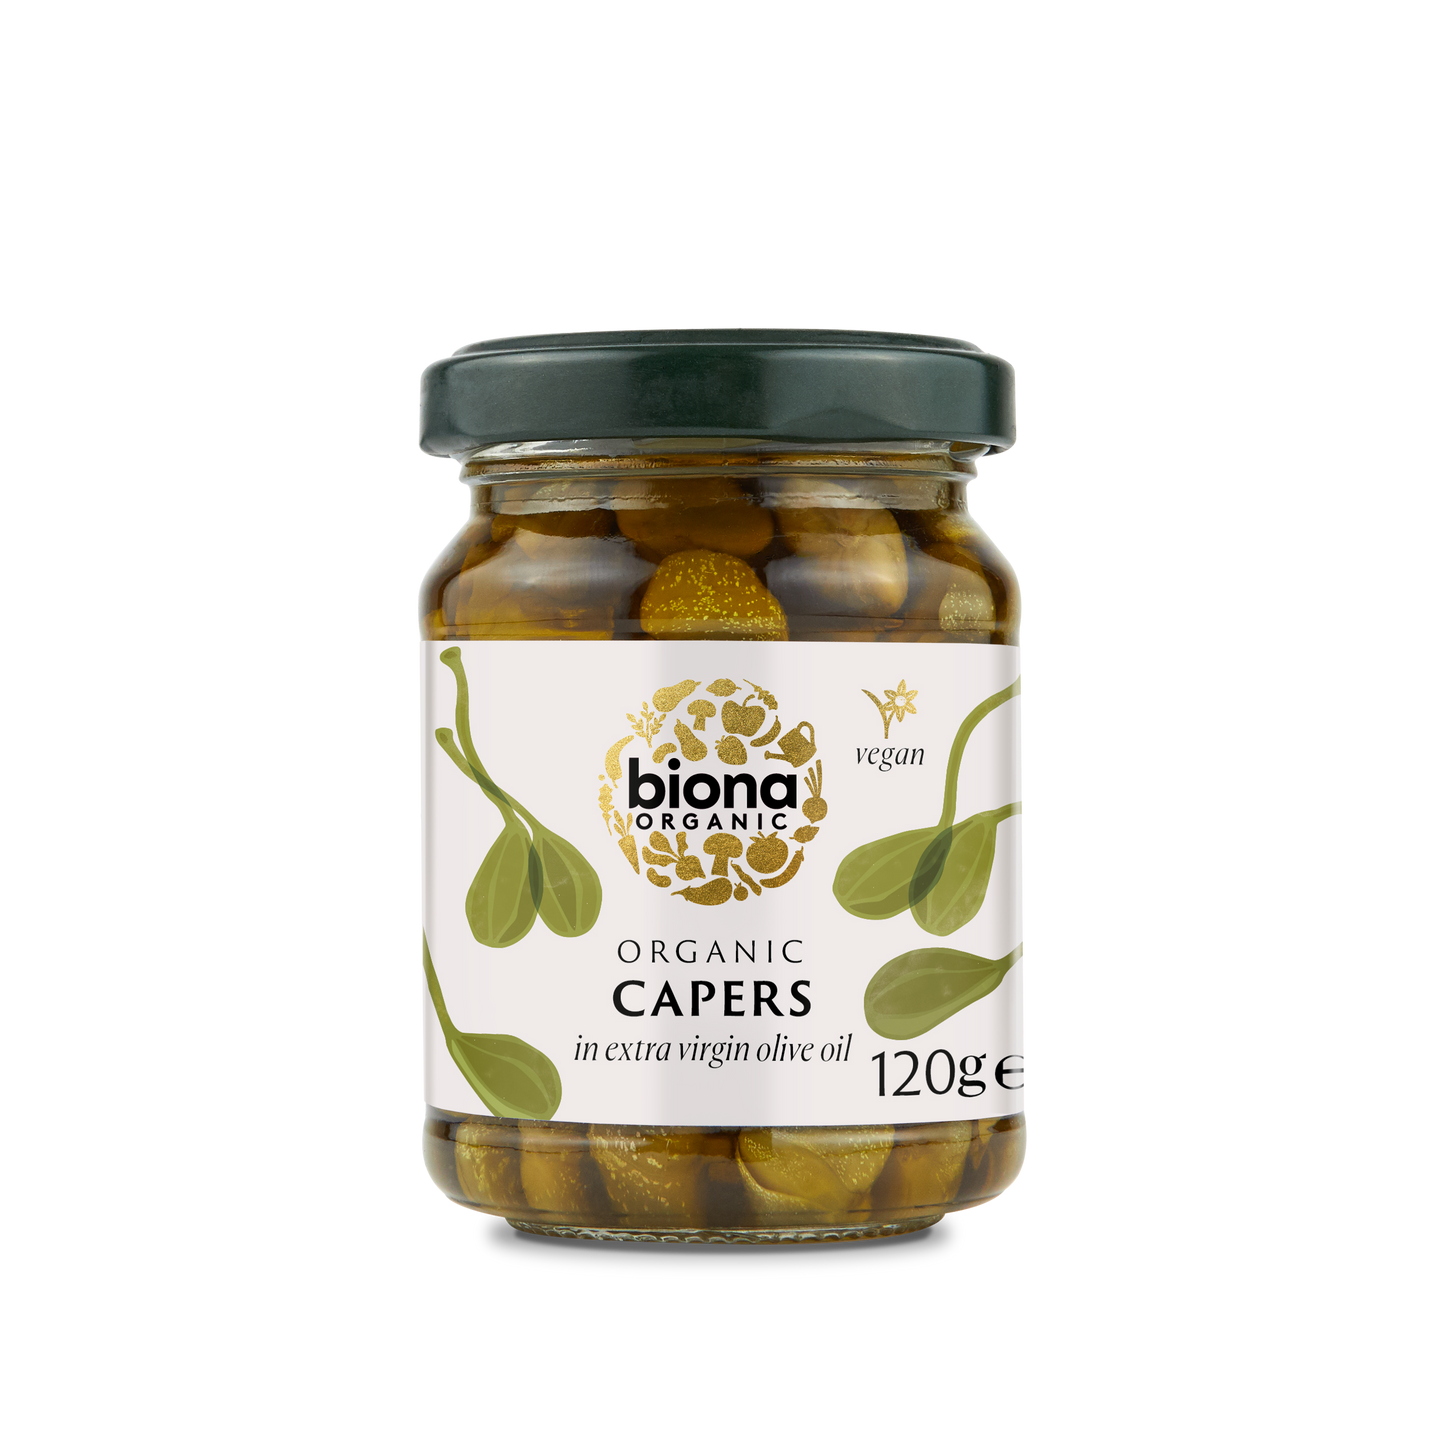 Biona Organic Capers in Extra Virgin Olive Oil 120g Pack of 4